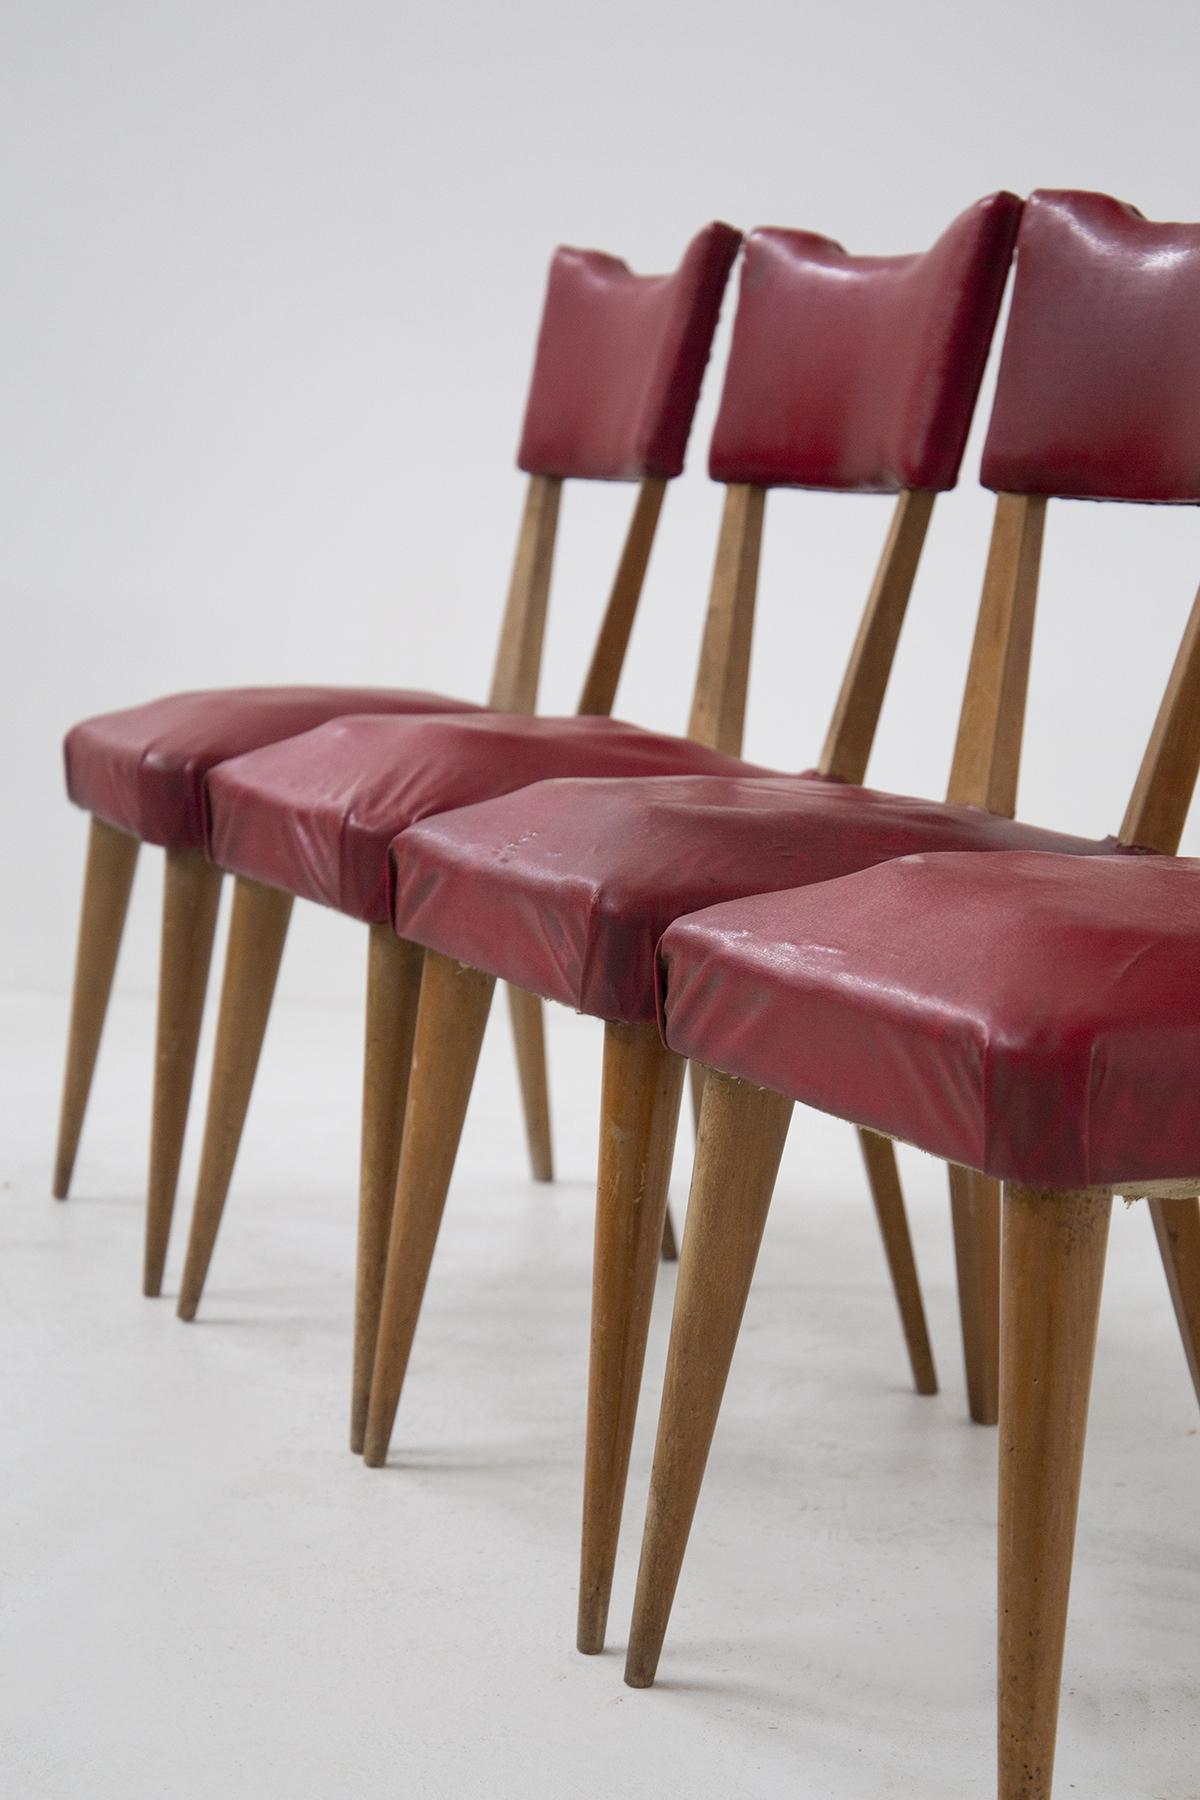 This beautiful set of four vintage chairs is from the '50s. With a solid structure in wood and upholstered in red sky leather, the vintage chairs are of fine French manufacture. They are most suitable for vintage rooms with an important aesthetic,